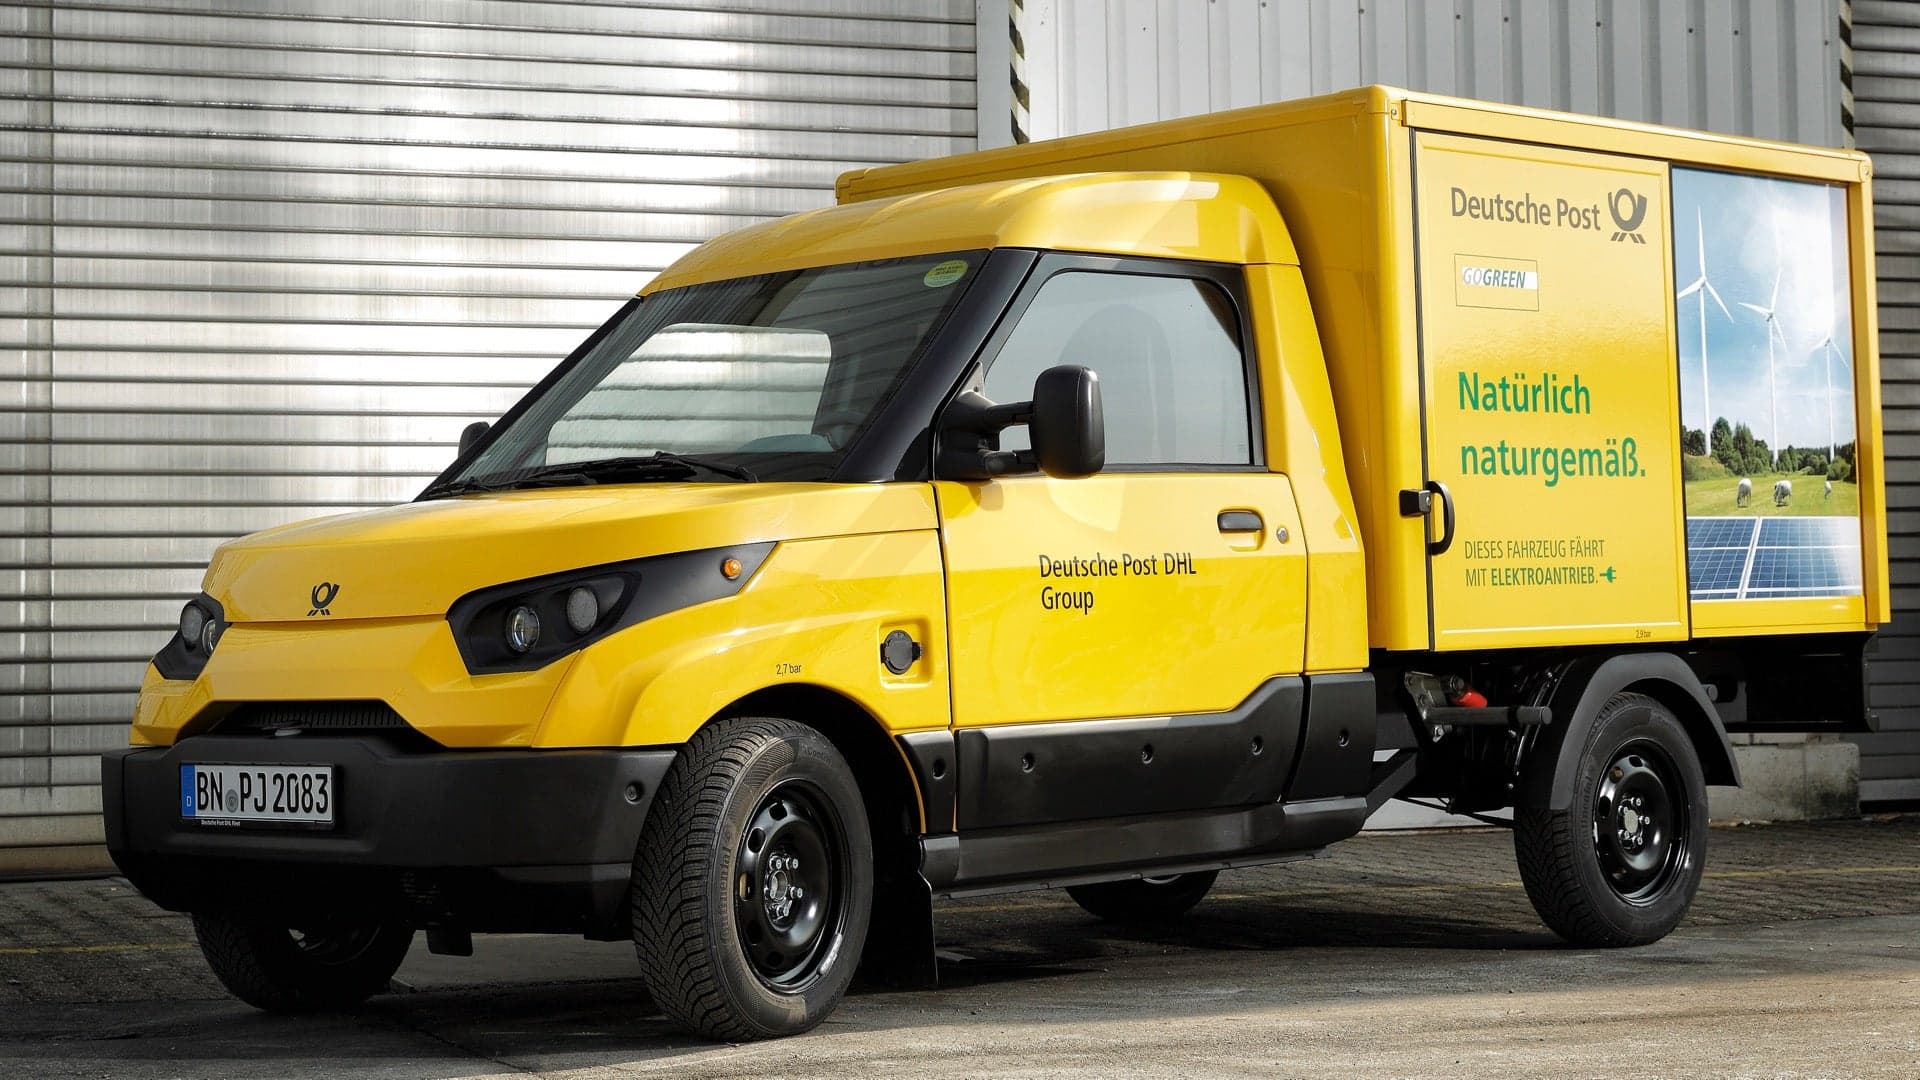 Daimler Engineers Reportedly Snagged a DHL Electric Van While Posing as Customers